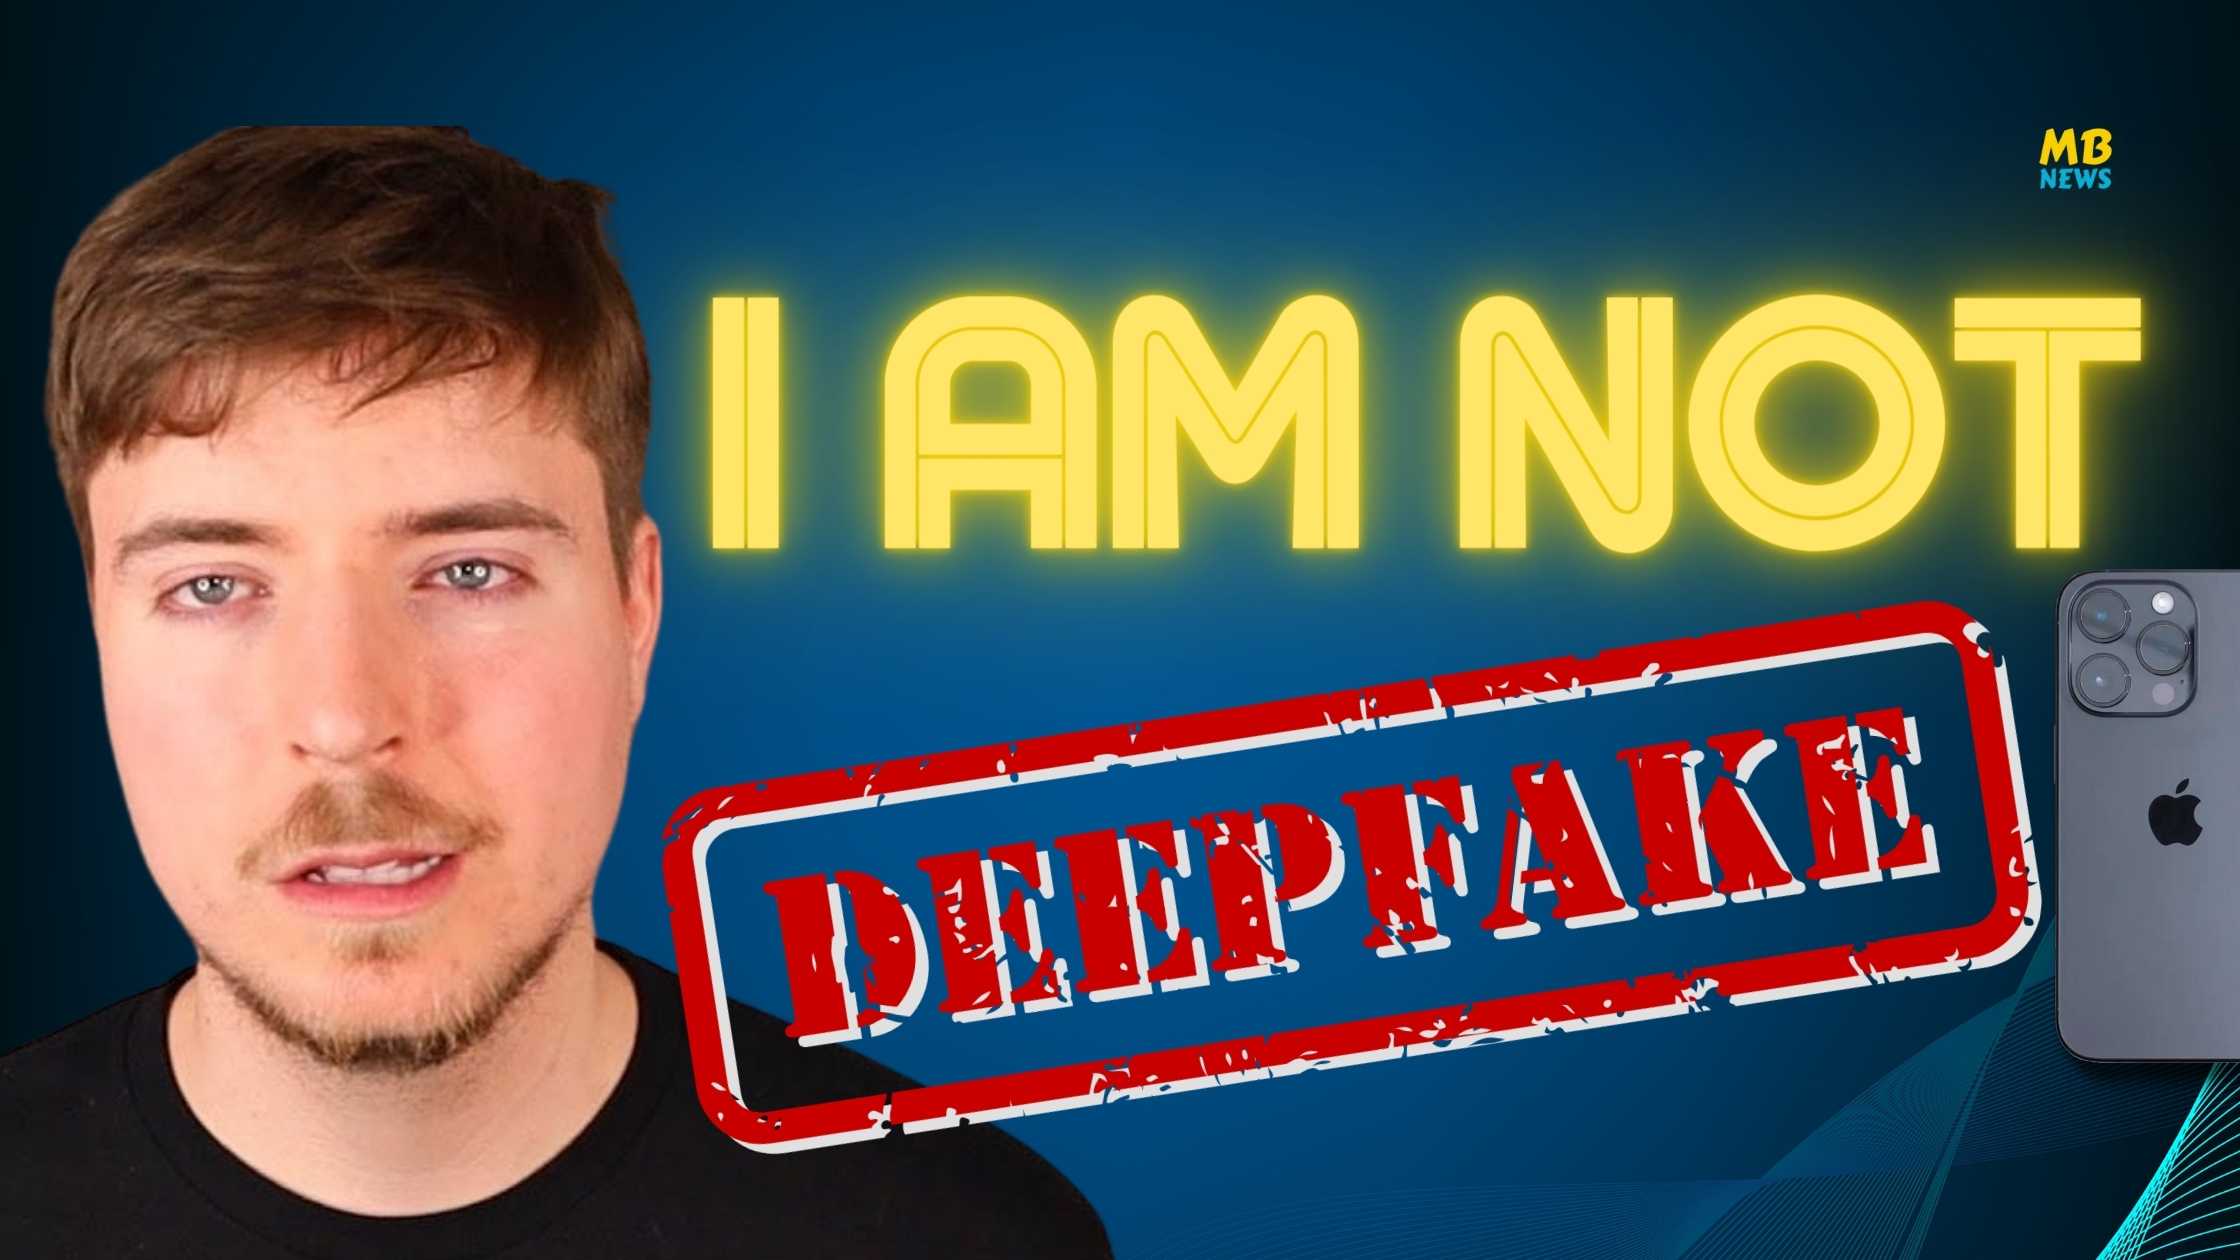 Know The Truth About Mrbeast iPhone Giveaways! - The Serious Issue of AI Deepfakes and MrBeast's Experience